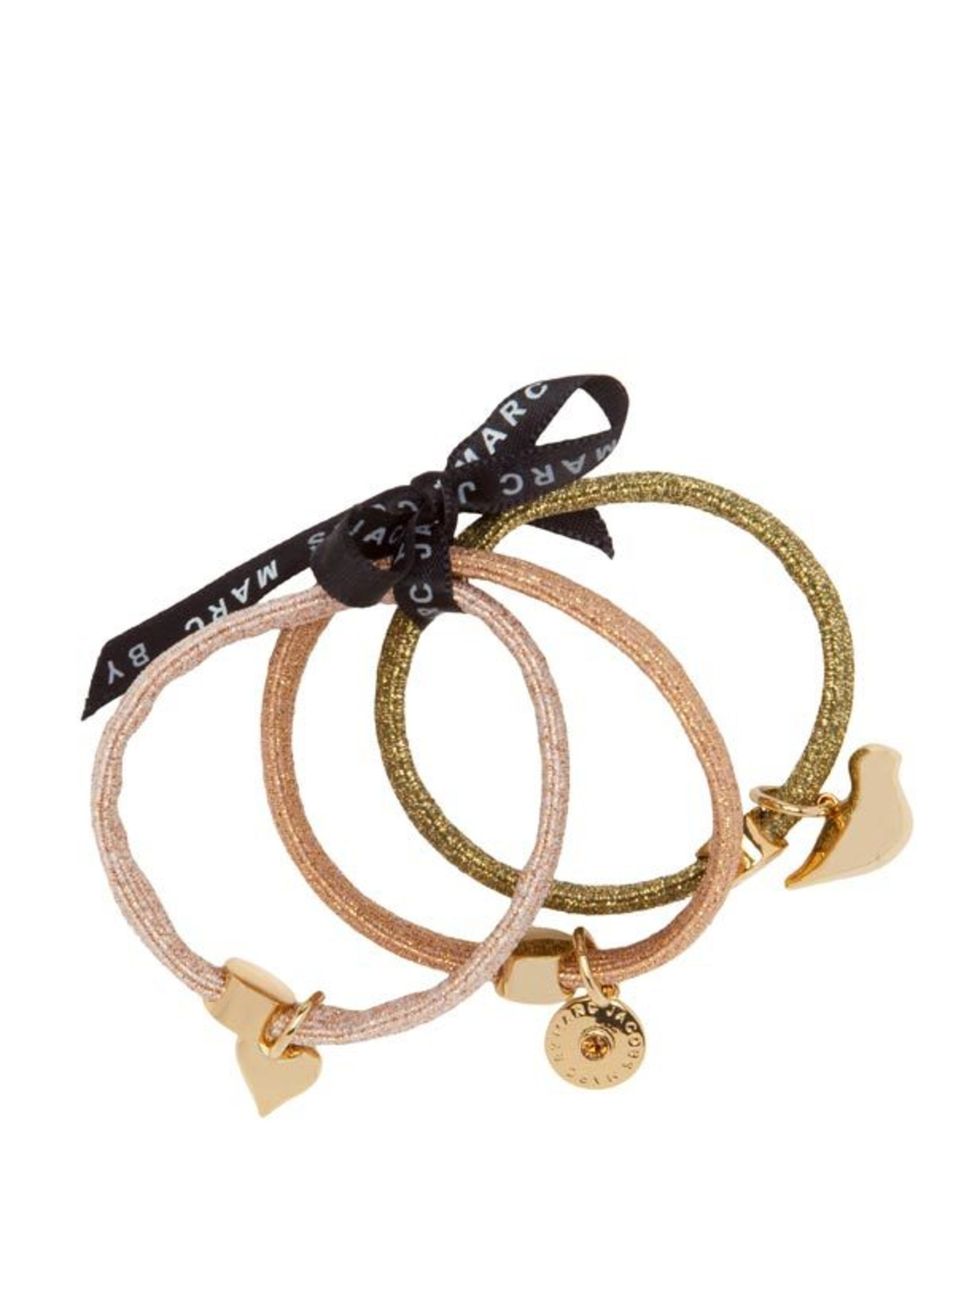 <p> </p><p>Wrapped around your hair or even around your wrist, these cute hair bands will add sparkle during the festive season. Or if youre feeling generous, they also make the perfect stocking filler. Marc by Marc Jacobs gold hair bands, £25, at <a hre